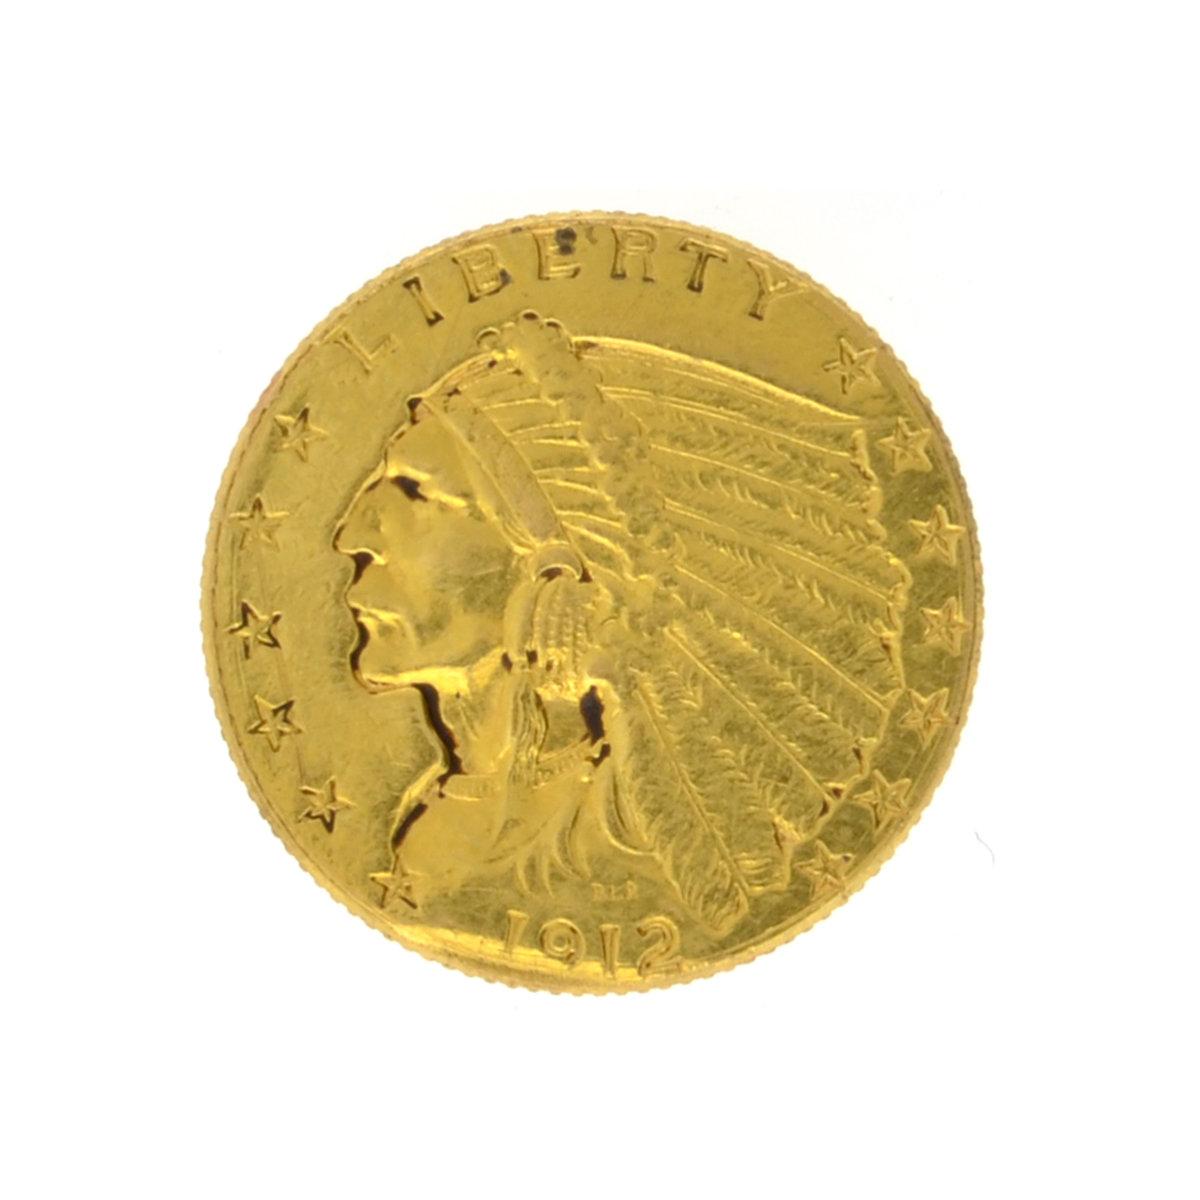 1912 $2.50 Indian Head Gold Coin